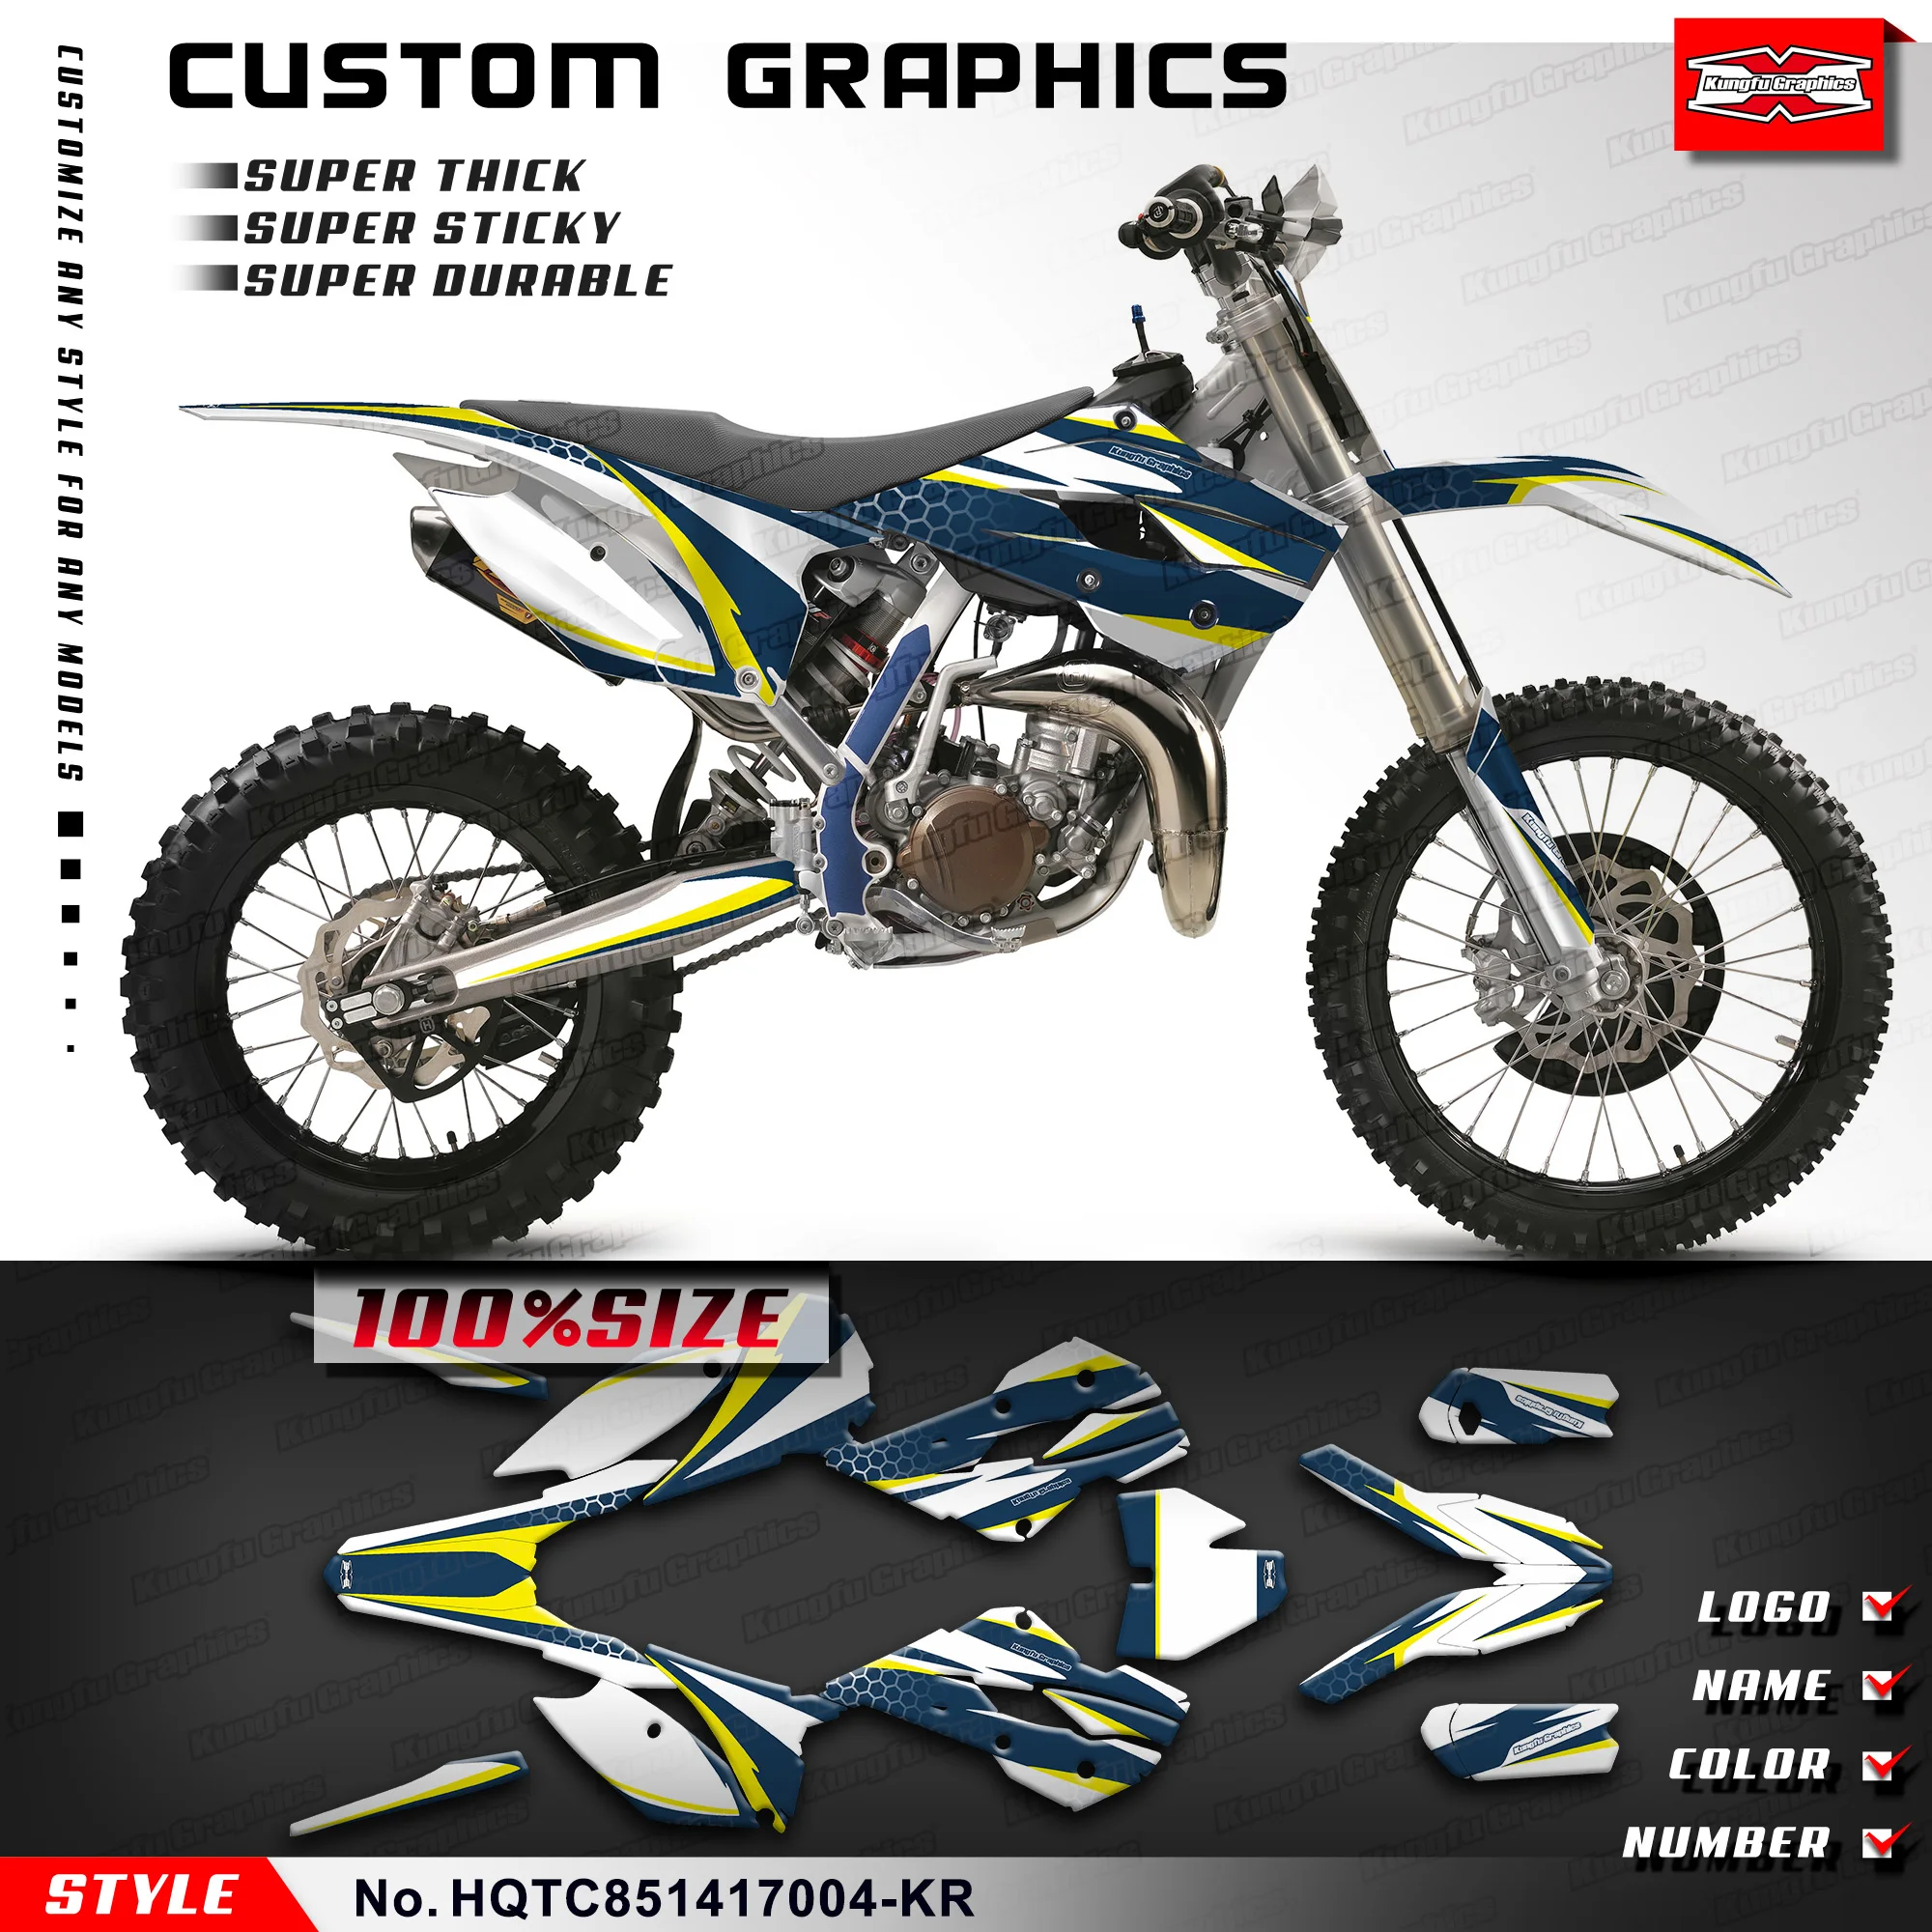 

KUNGFU GRAPHICS Stickers Set Motorcycle Decals for Husqvarna TC85 2014 2015 2016 2017, HQTC851417004-KR